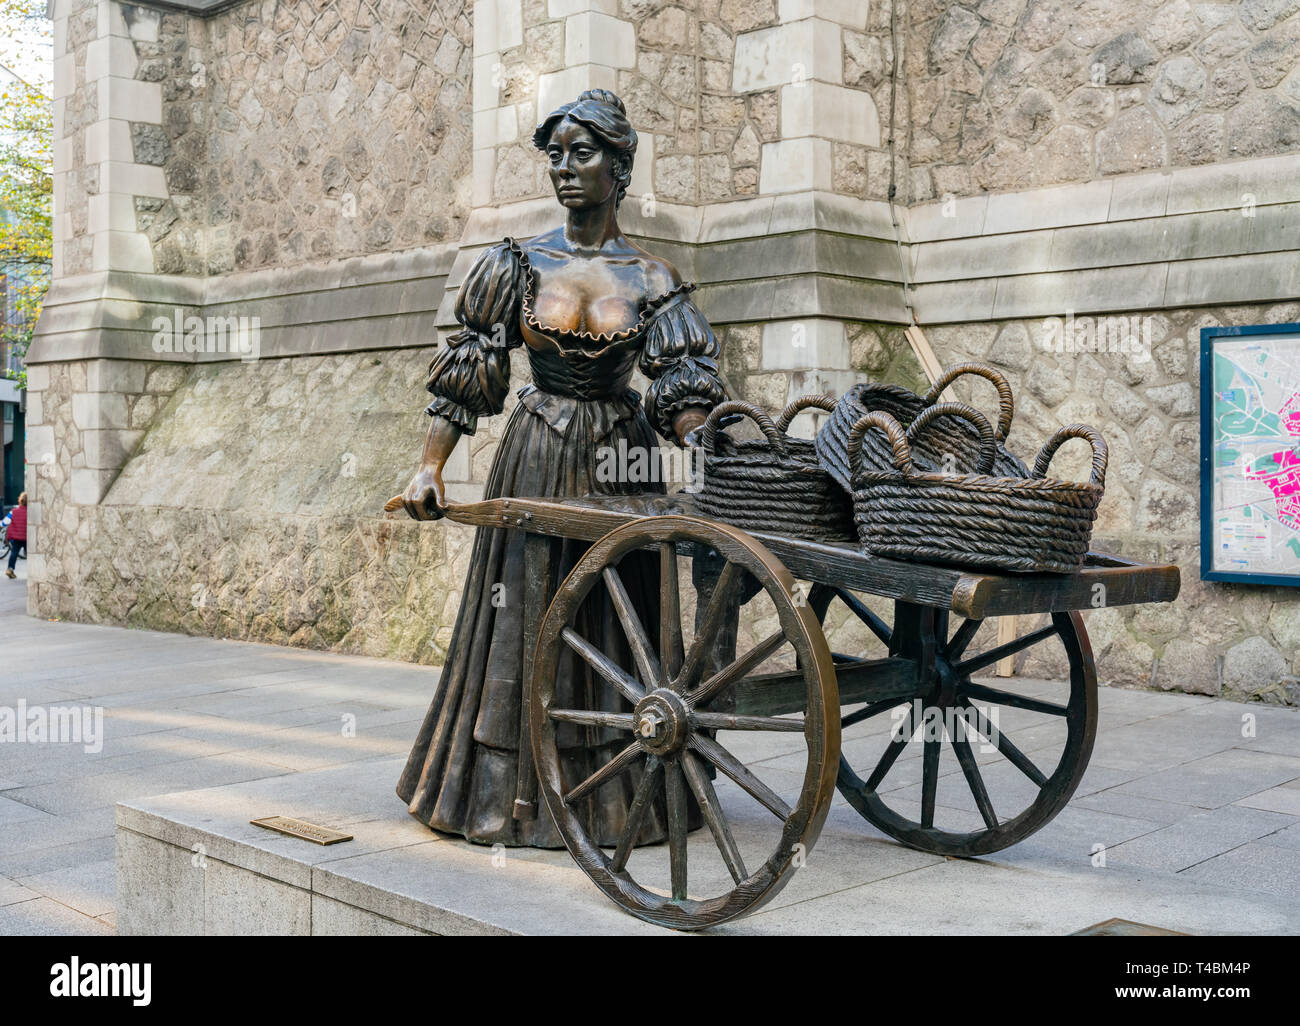 Dublin, OCT 28: Morning exterior view of the famous Molly Malone Statue ...